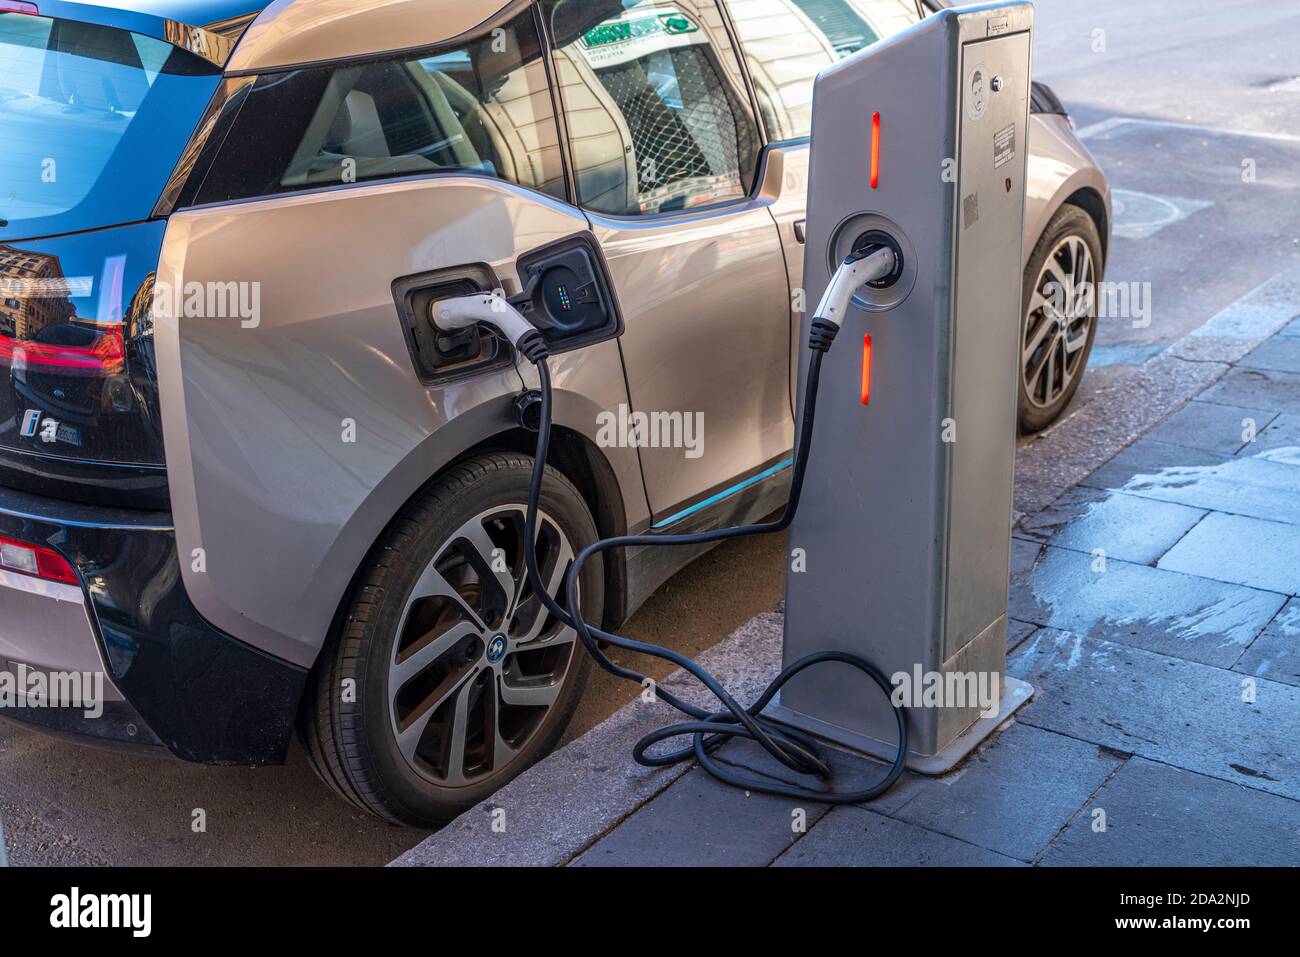 Power supply connect to electric vehicle for charge to the battery. EV fuel Plug in hybrid car. Rome, Lazio, Italy, Europe Stock Photo